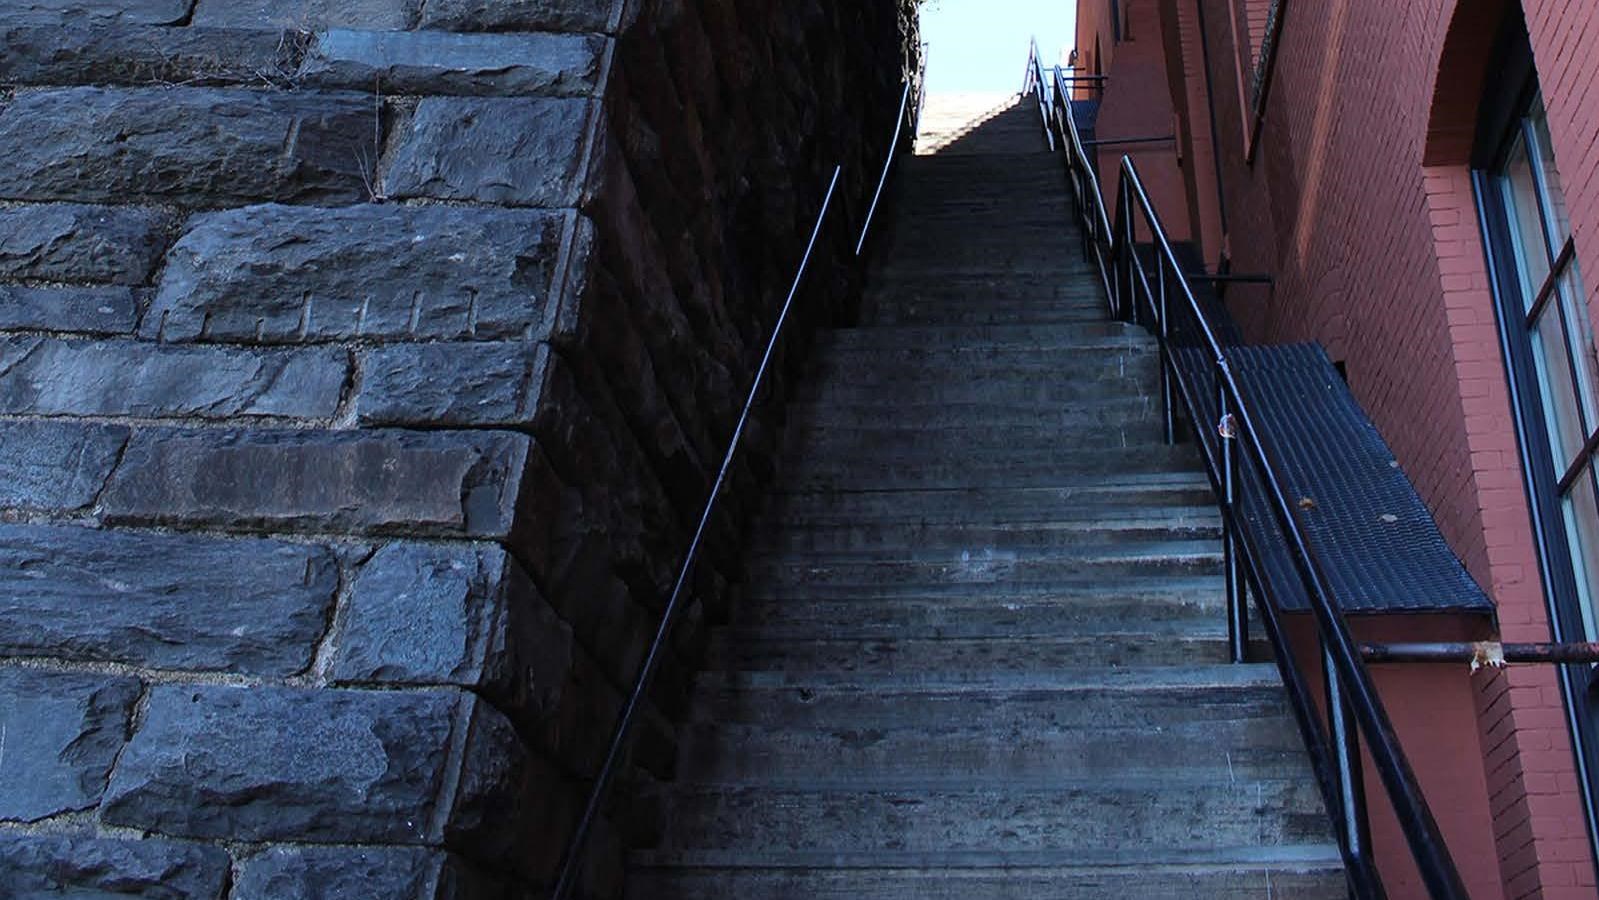 Long, narrow, steep staircase. A building on one side and a retaining wall on the other side